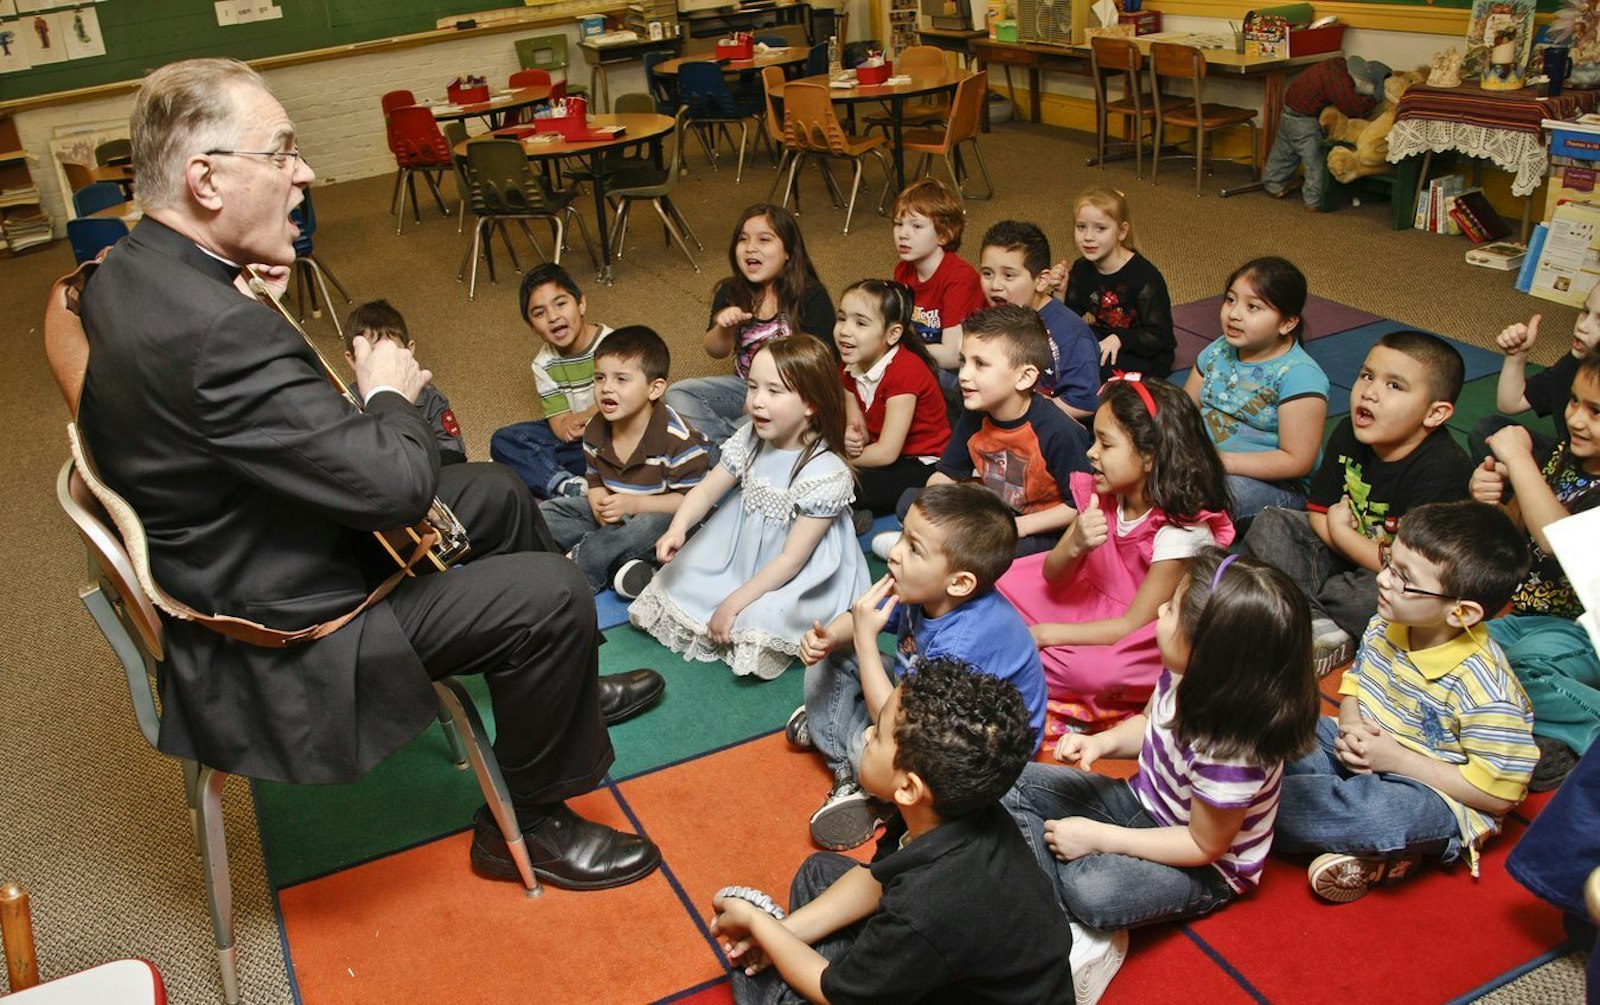 Then-Msgr. Hanchon strums his ukulele as he sings to a group of schoolchildren at Holy Redeemer School in southwest Detroit. (Larry A. Peplin | Detroit Catholic file photo)